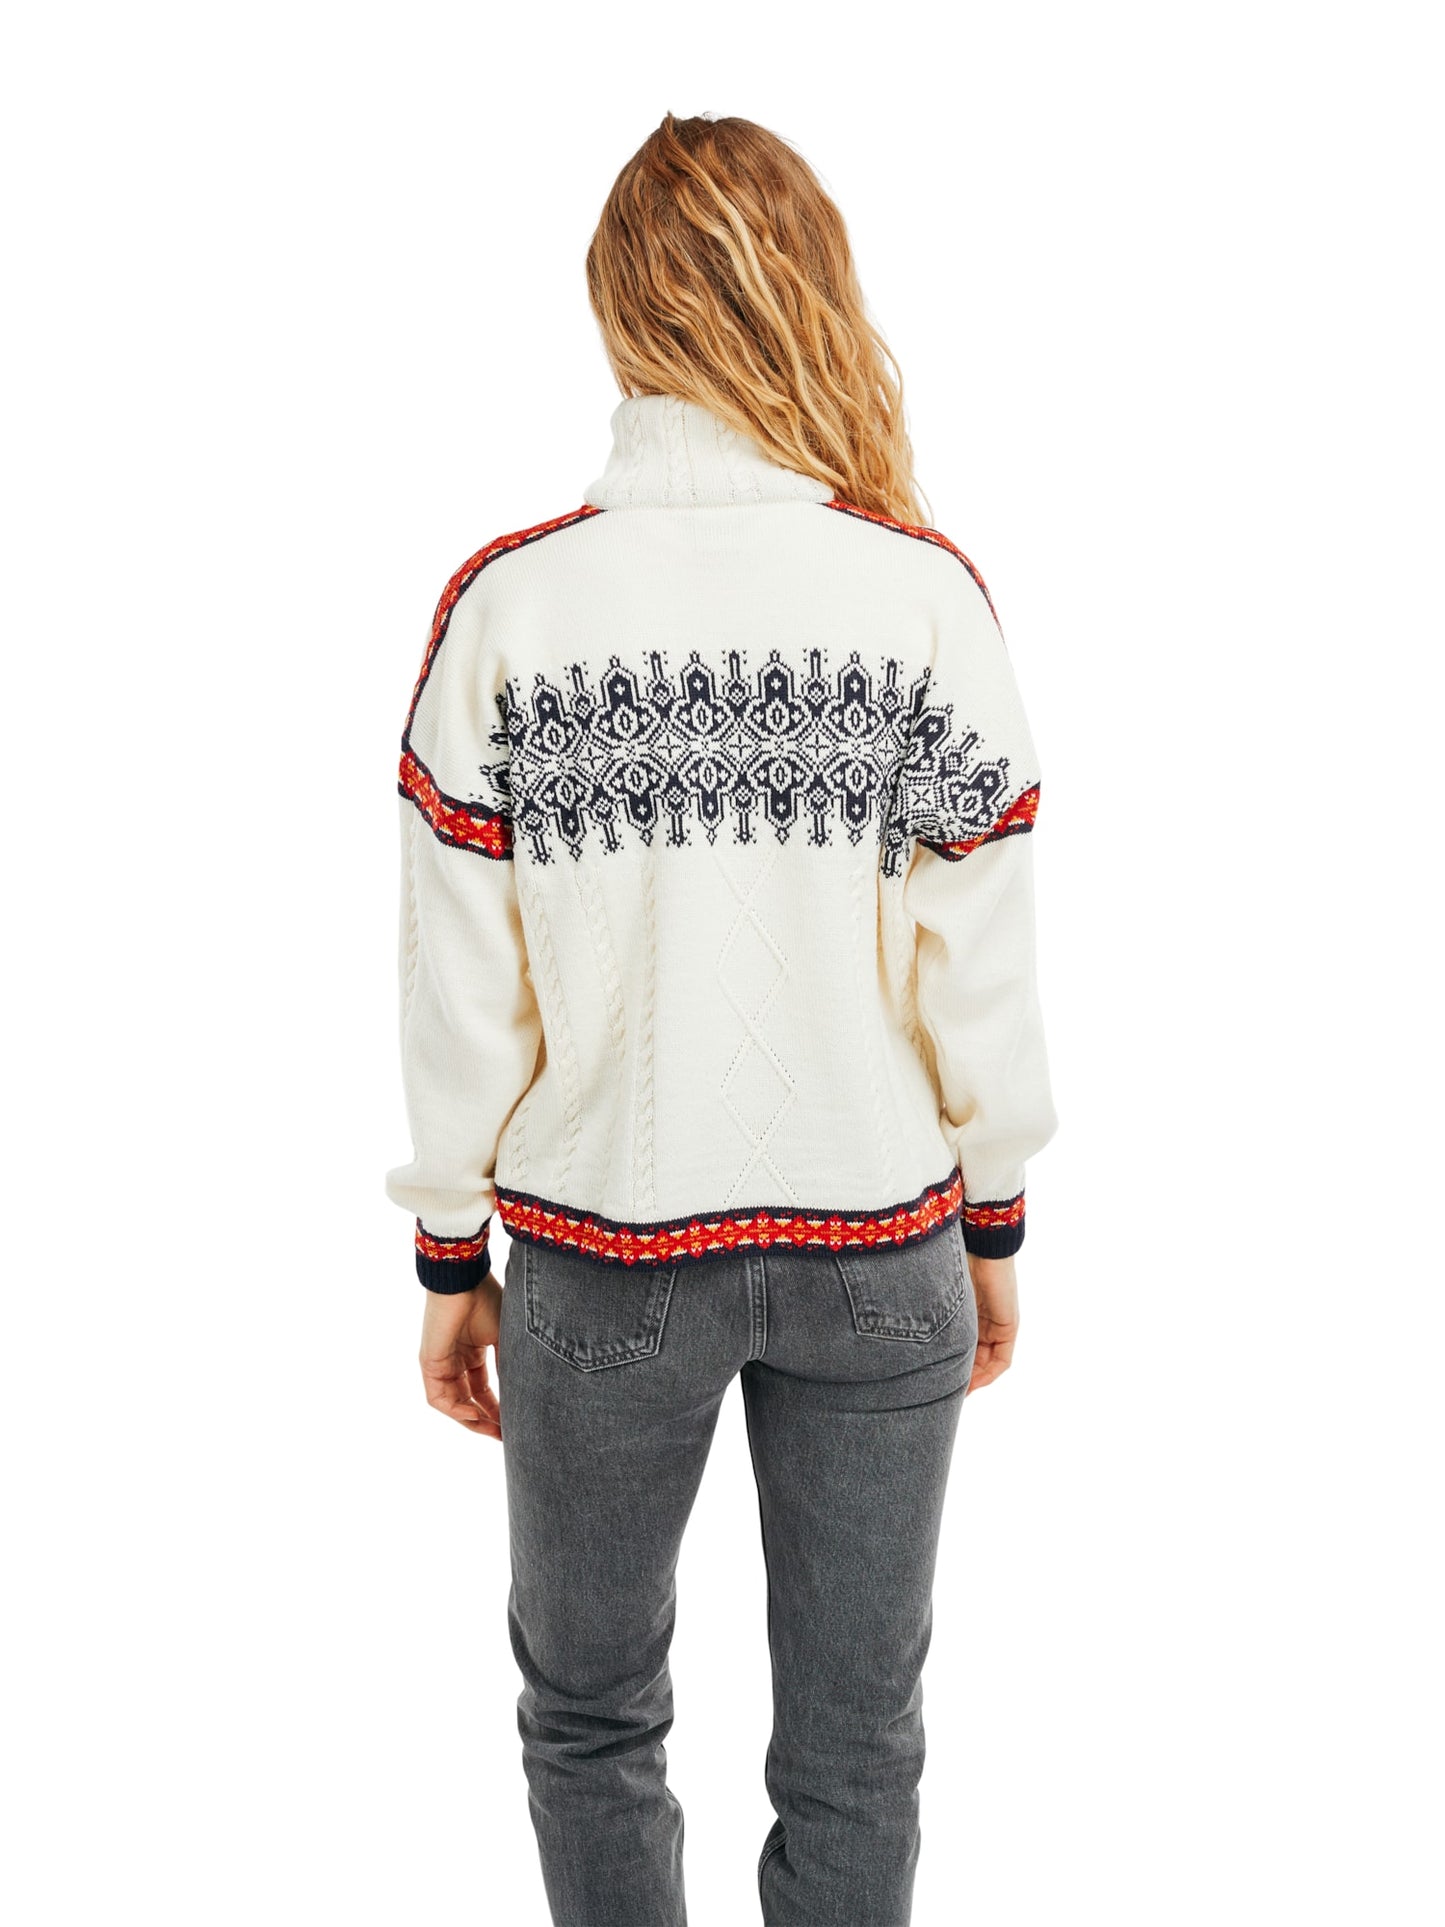 Dale of Norway - Aspøy Sweater - Offwhite raspberry navy (D)